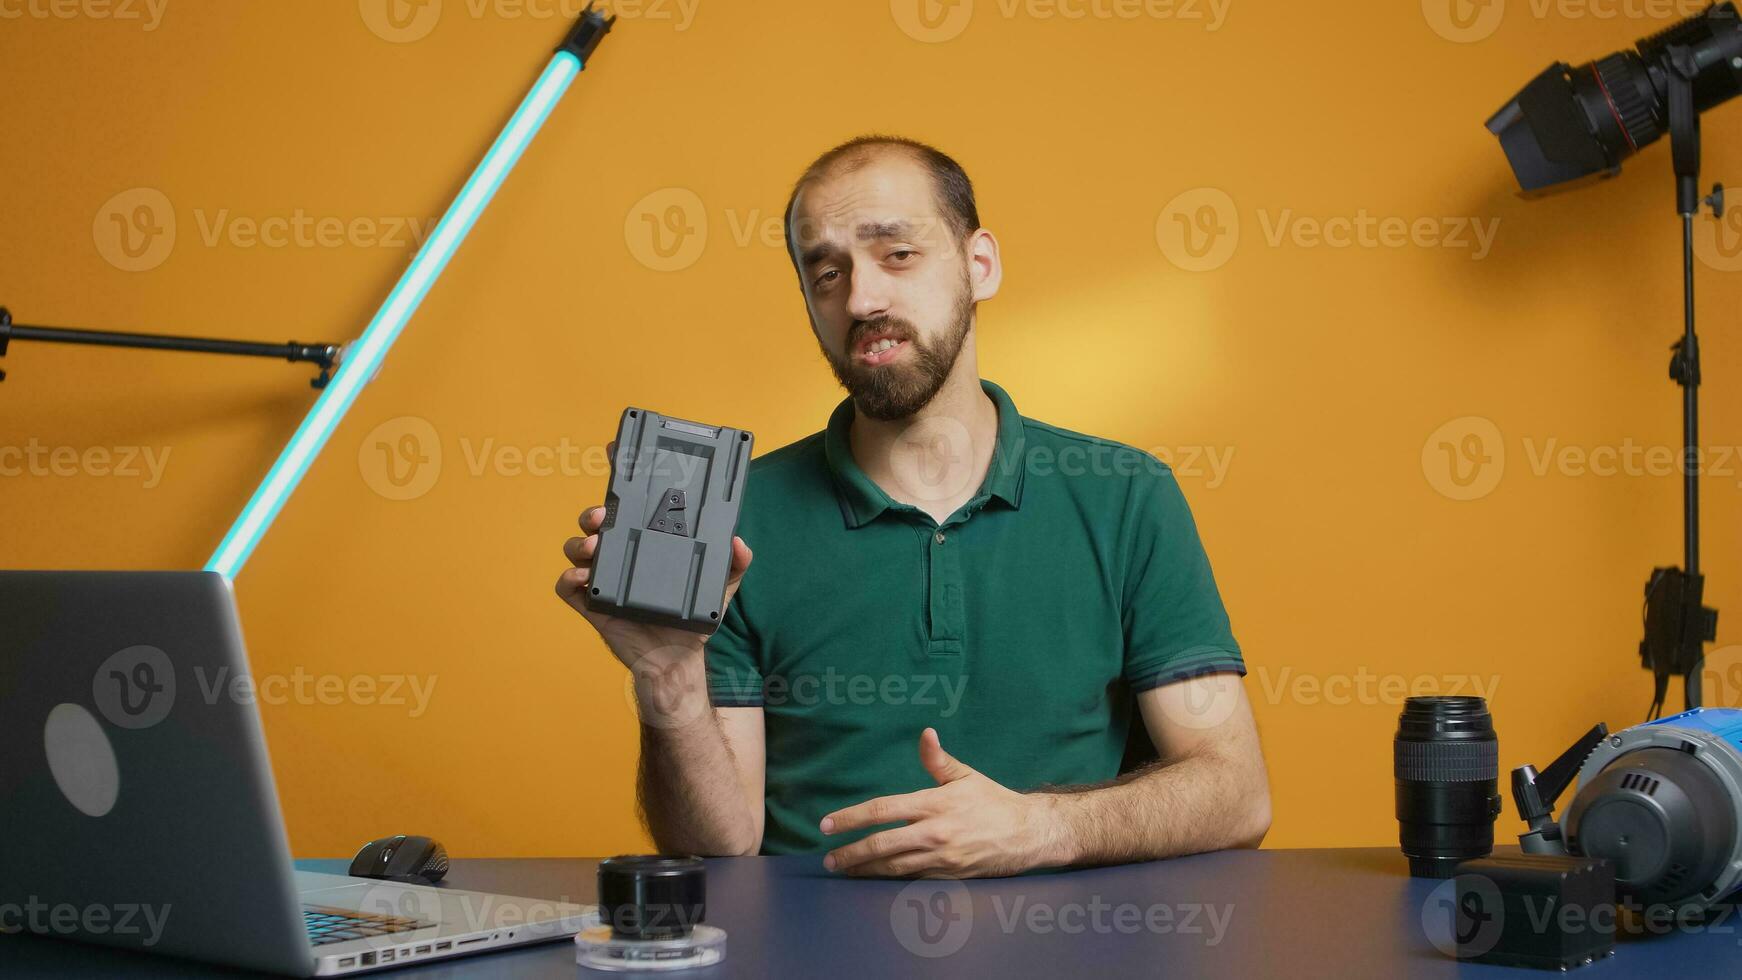 Content creator holding and recording v mount battery review for vlog. Professional acumulator. Modern V-Lock type technology, social media star influencer online distribution photo